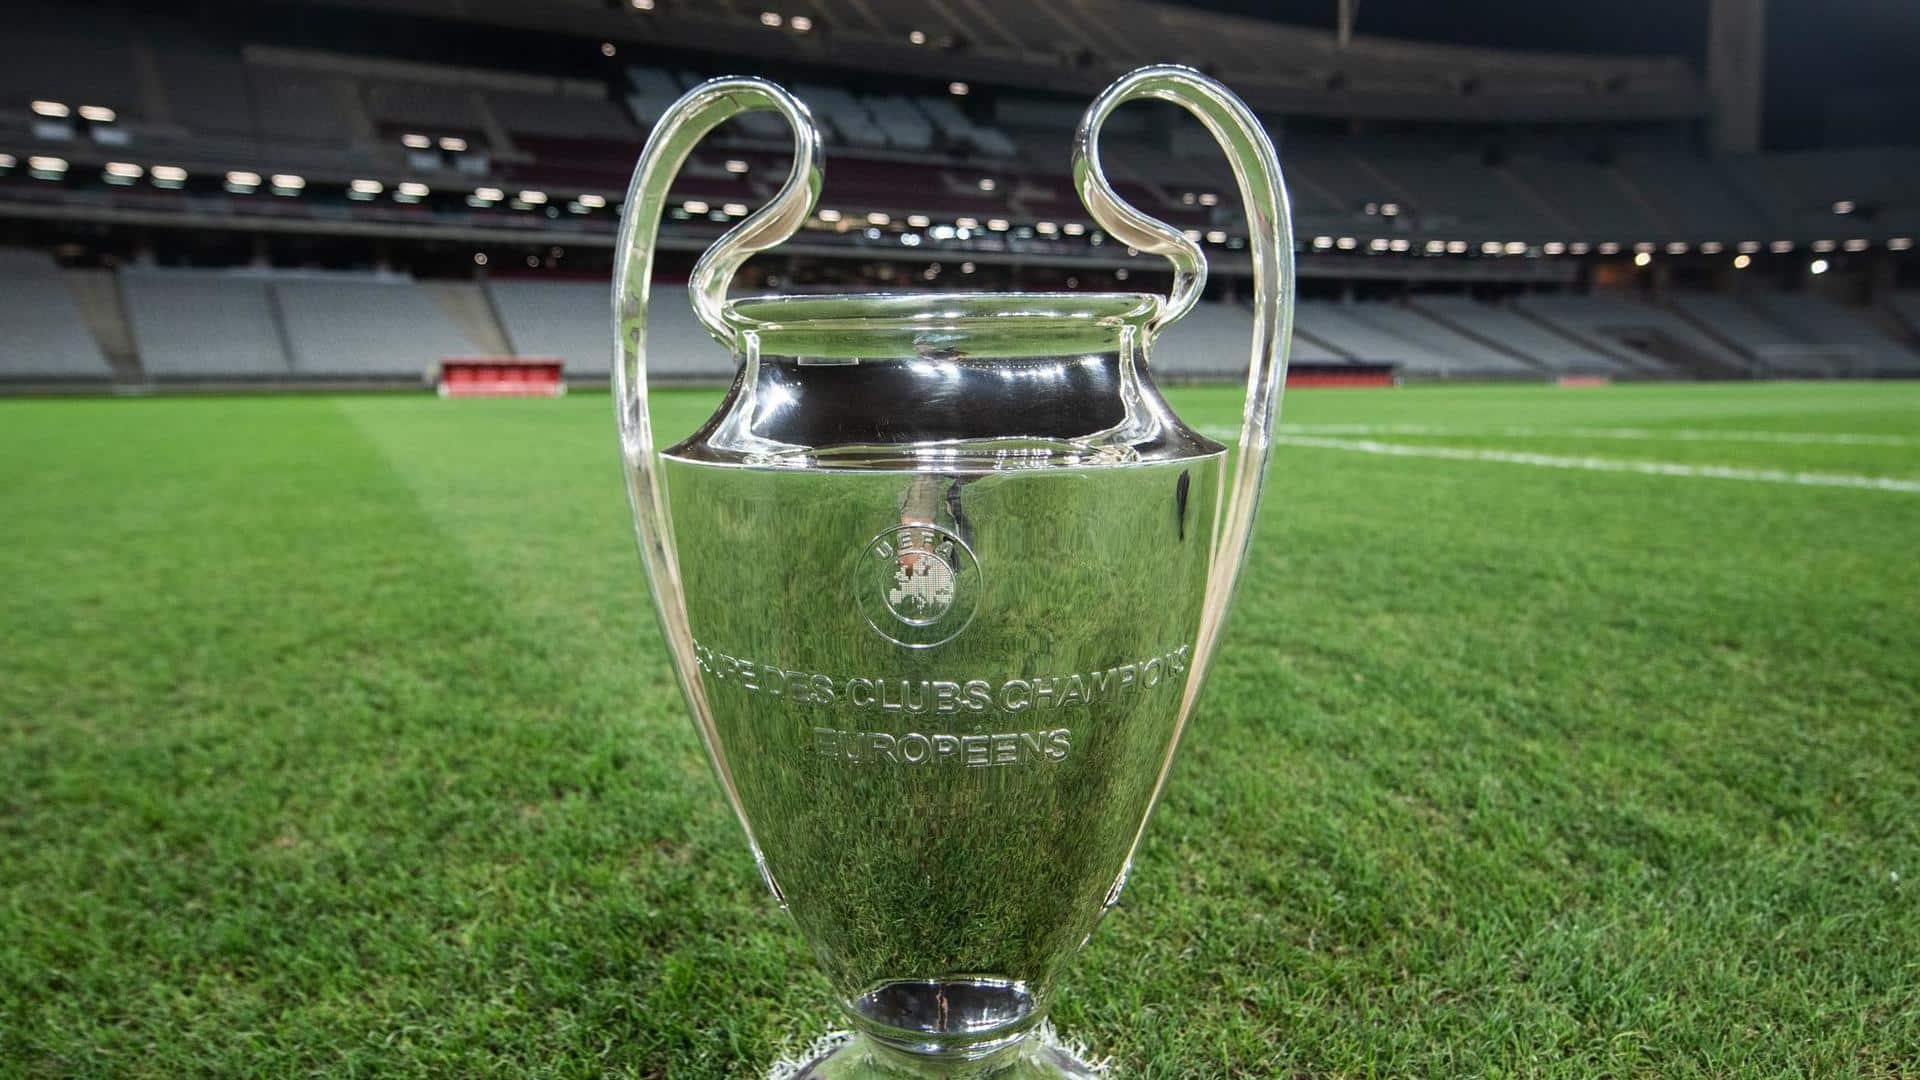 Champions League round of 16: Real Madrid to face Liverpool